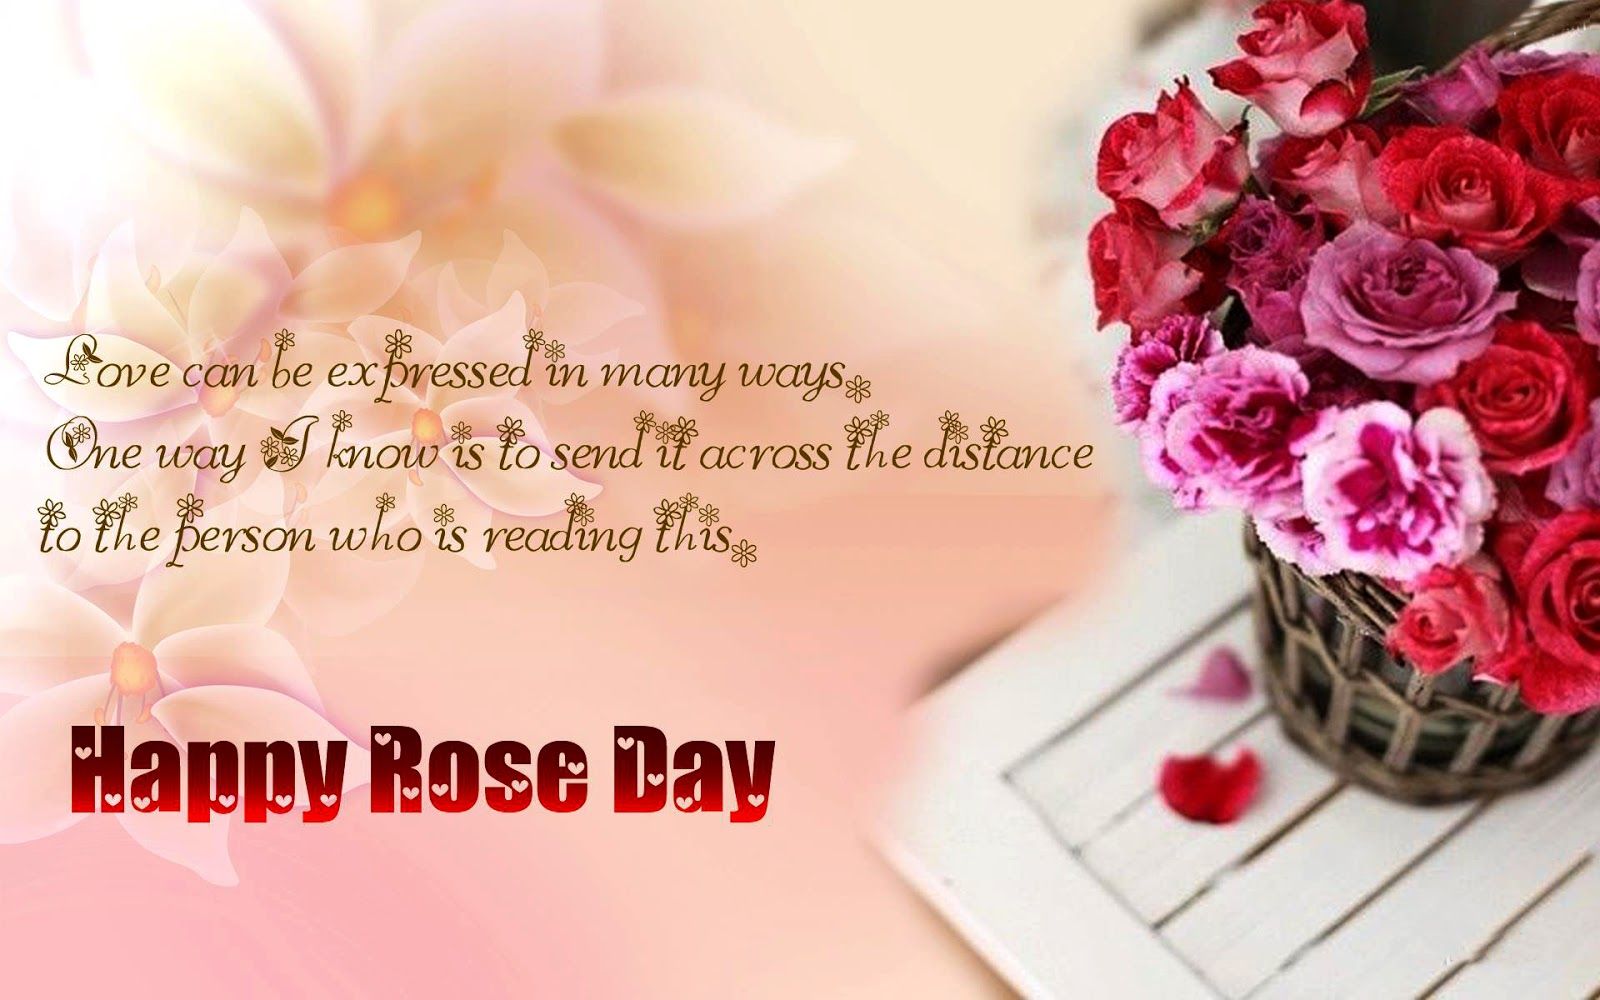 Happy Rose Day Wallpaper HD Download